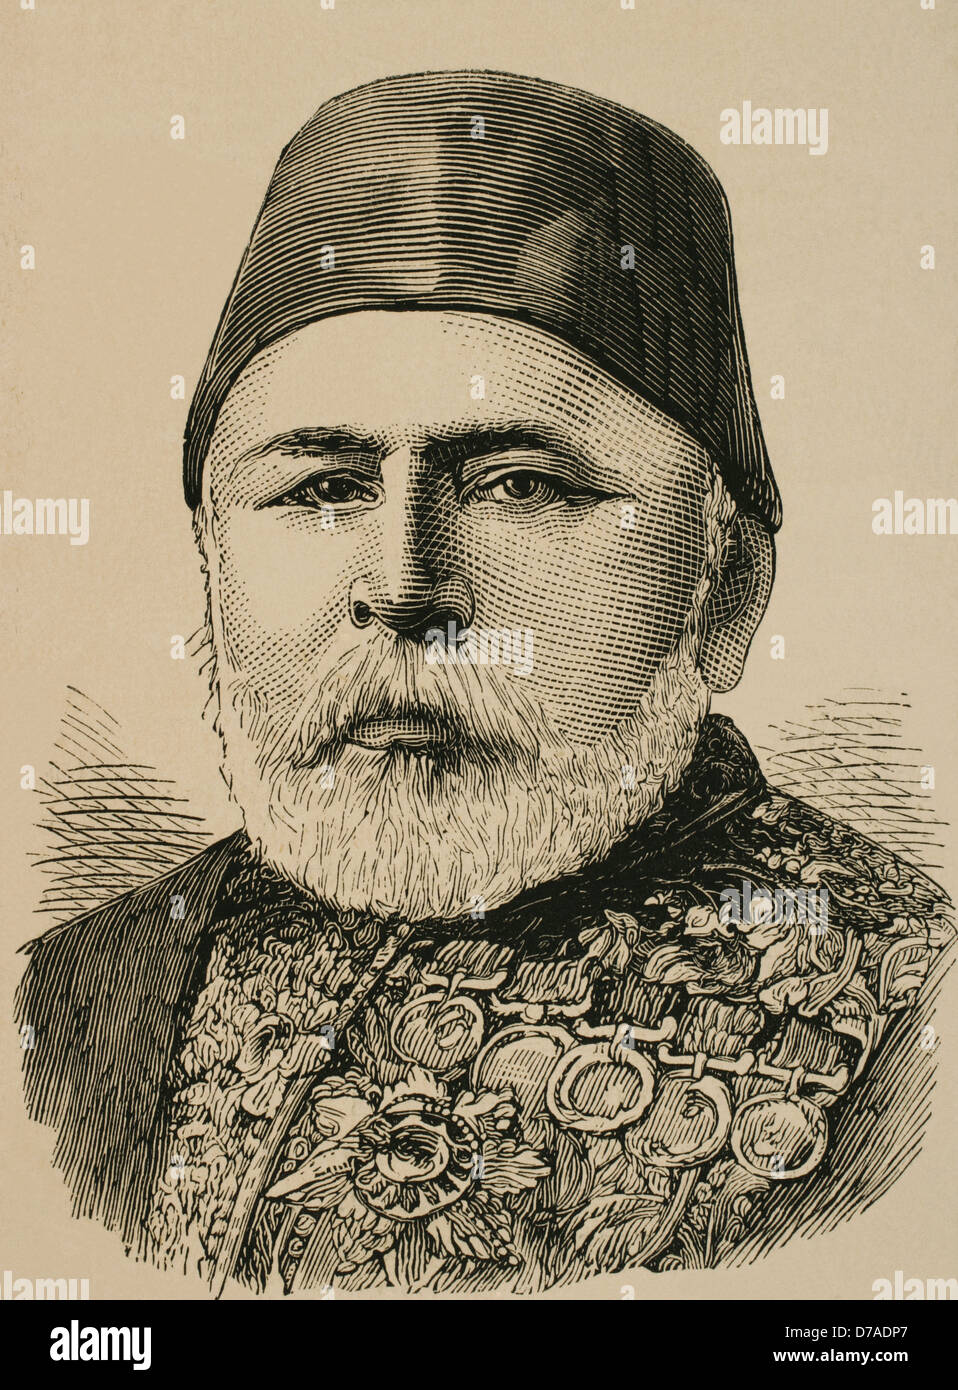 Hussein Awni pasha (1819 1876). Was a Turkish general and statesman. Engraving by Rico Stock Photo